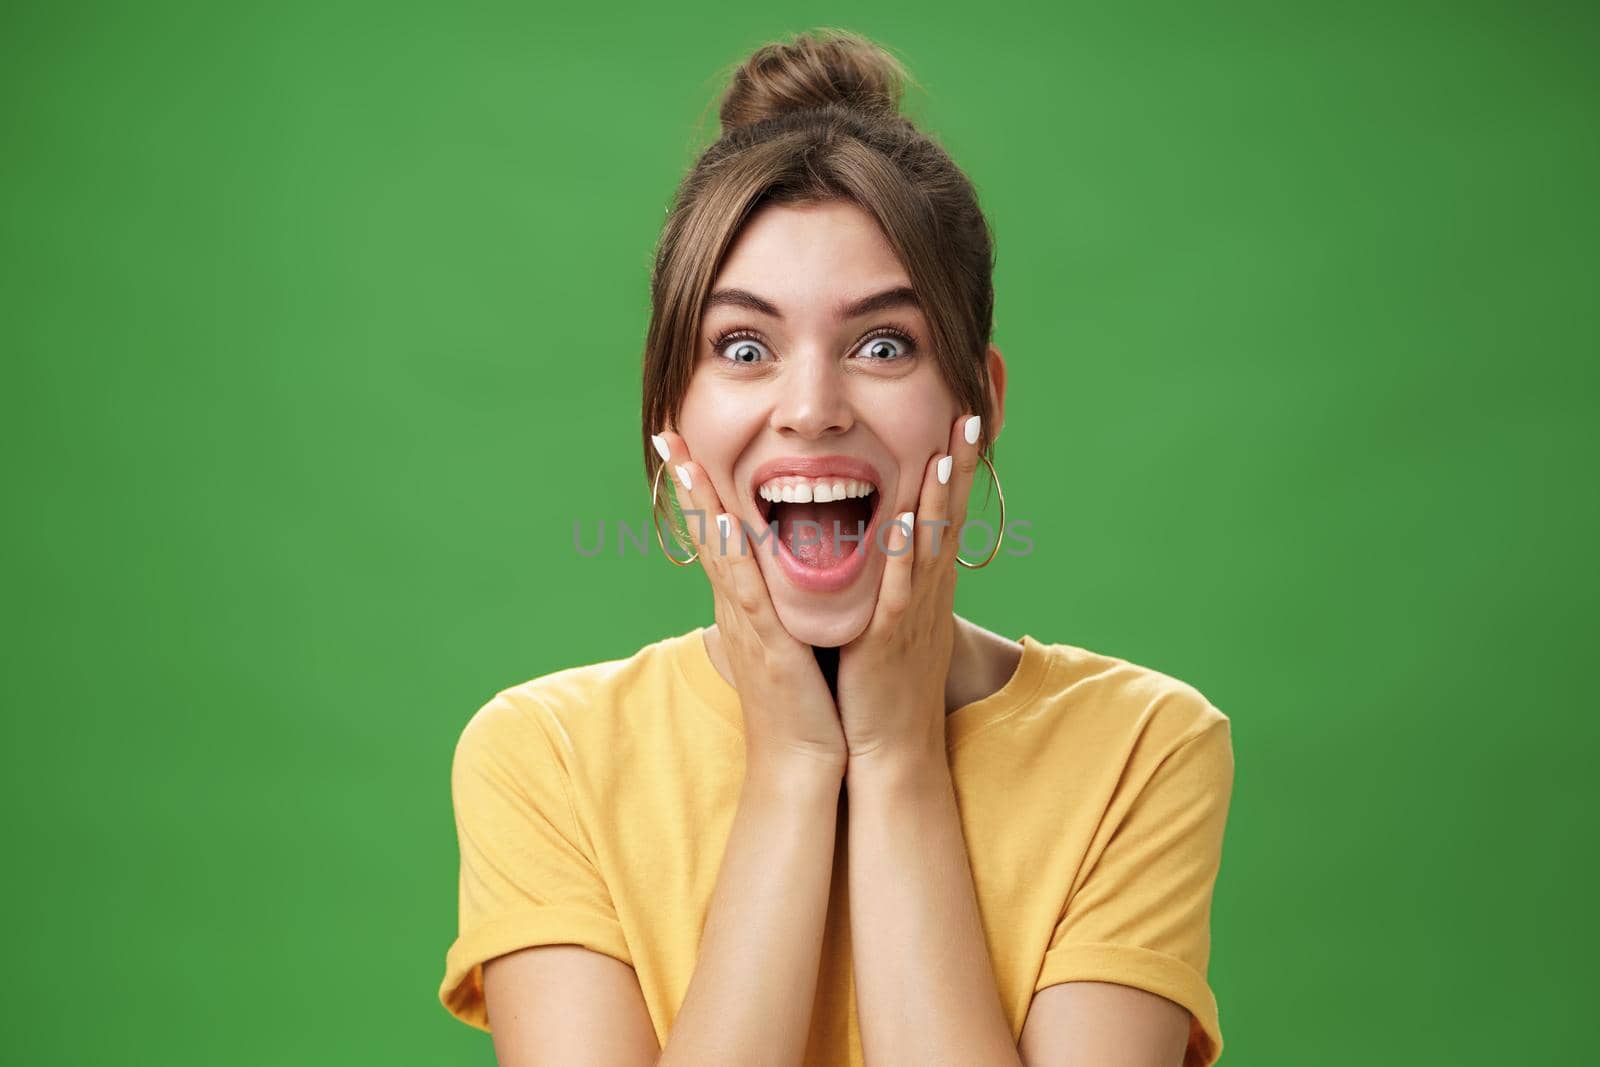 Portrait of happy delighted and surprised young feminine girl in yellow t-shirt pressing hands to cheeks from amazement and joy smiling broadly reacting to astonishing news over green background. Emotions concept